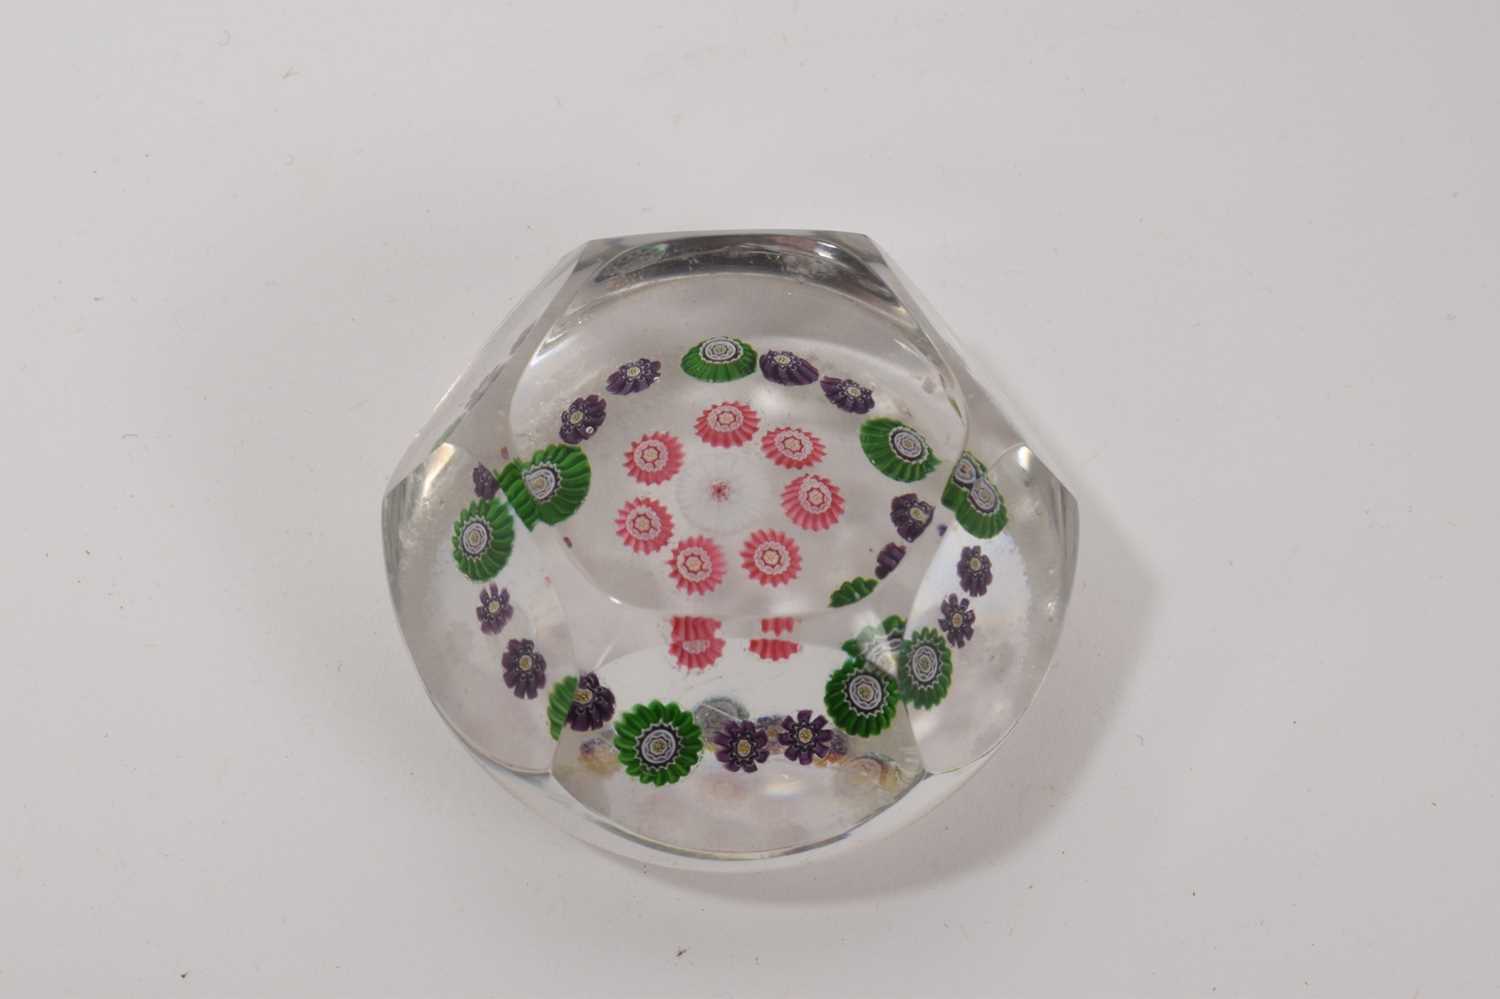 Lot 54 - 19th century facetted paperweight, possibly Clichy